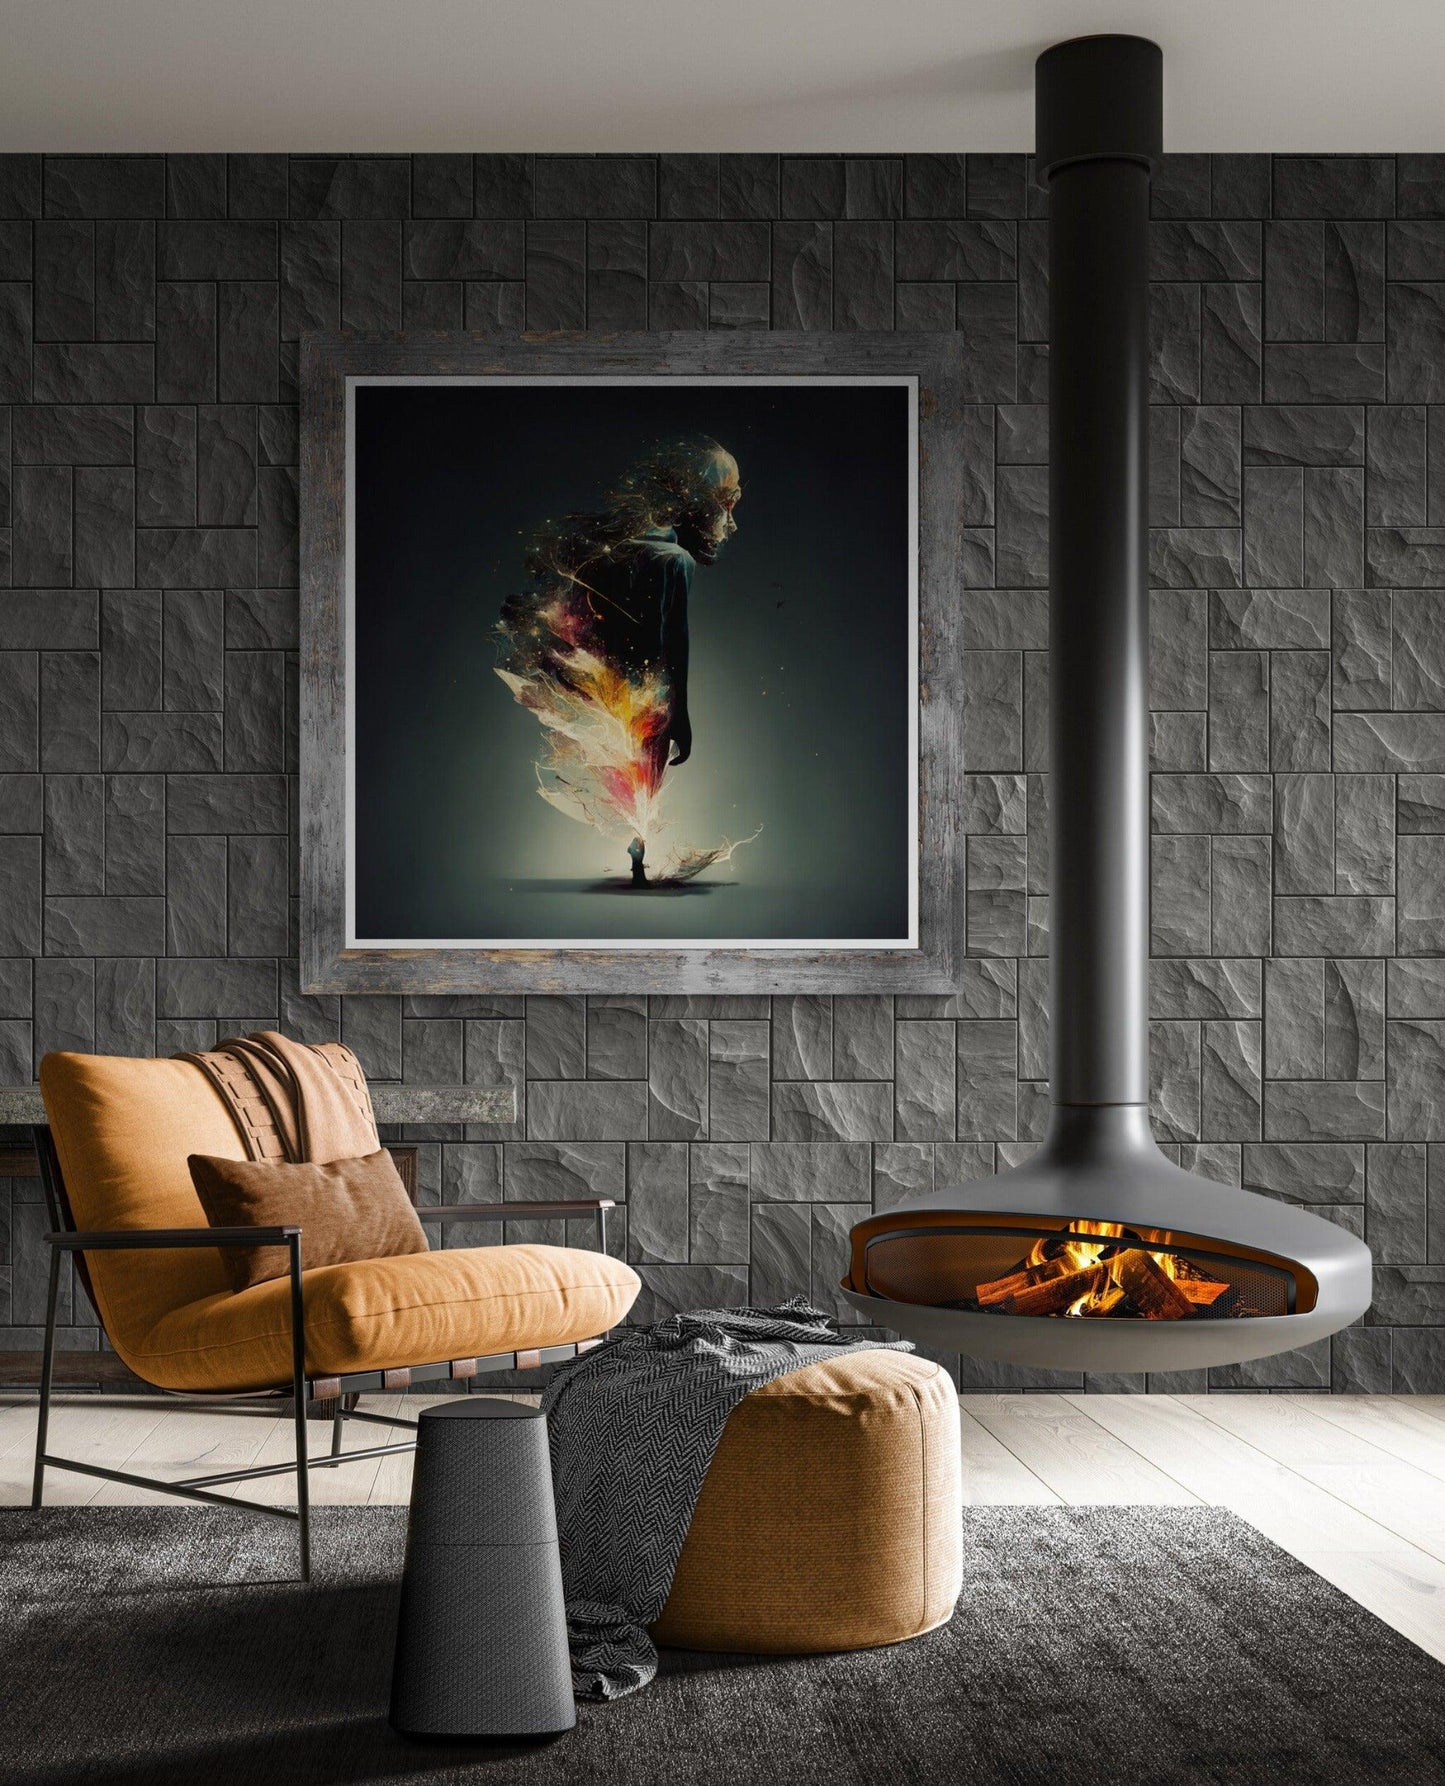 Modern_living_room_with_suspended_fireplace0ffe81086e7a_3